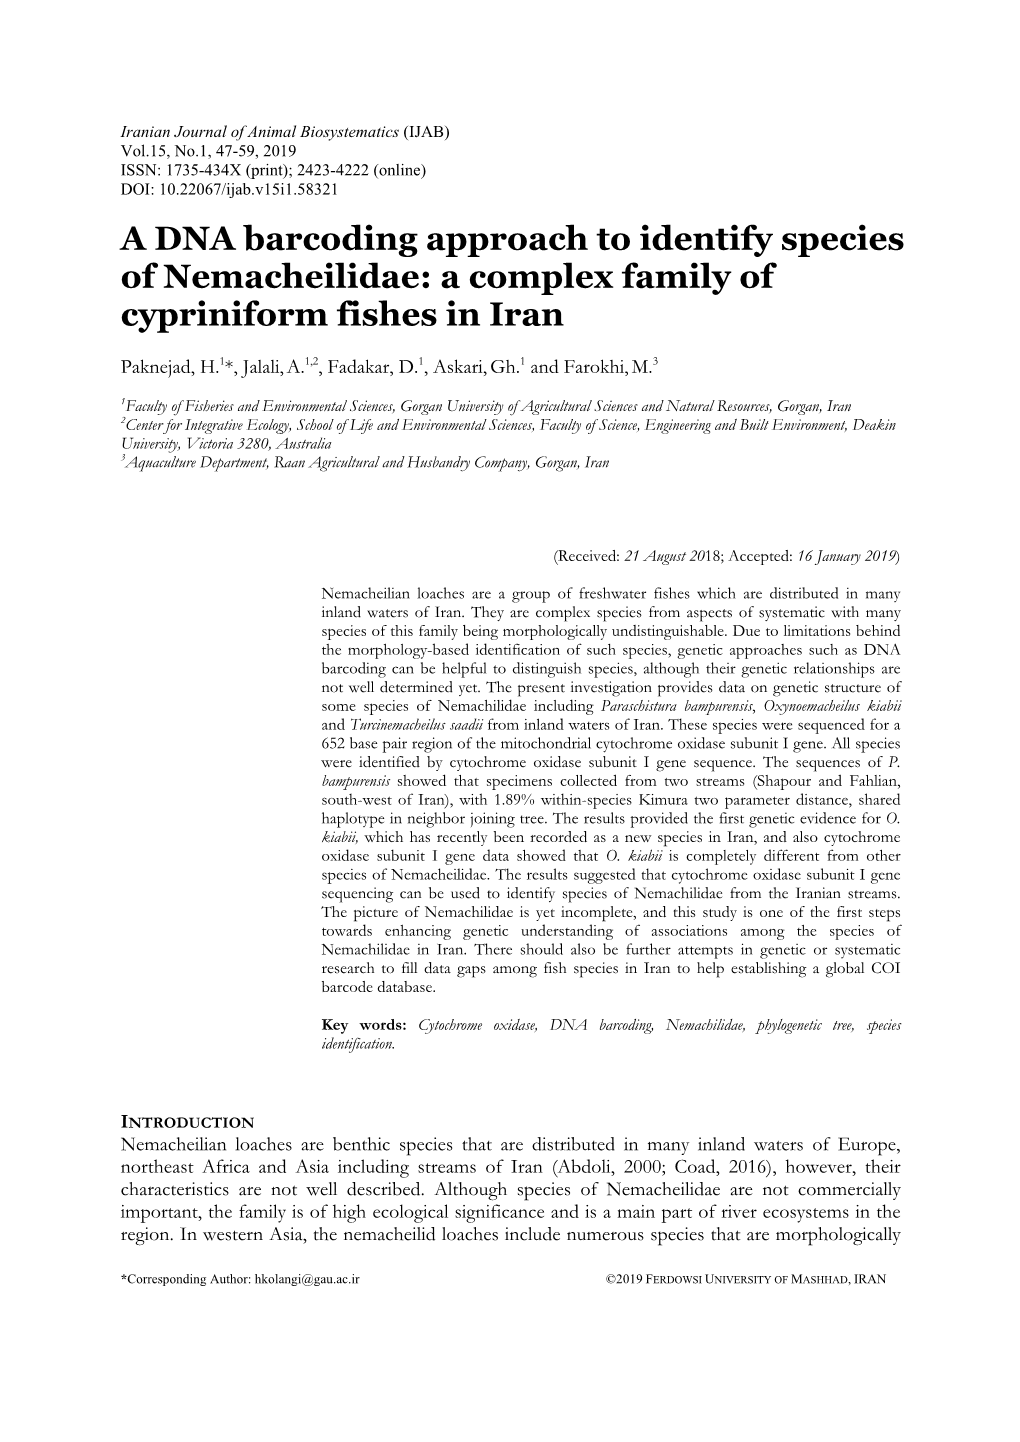 A DNA Barcoding Approach to Identify Species of Nemacheilidae: a Complex Family of Cypriniform Fishes in Iran